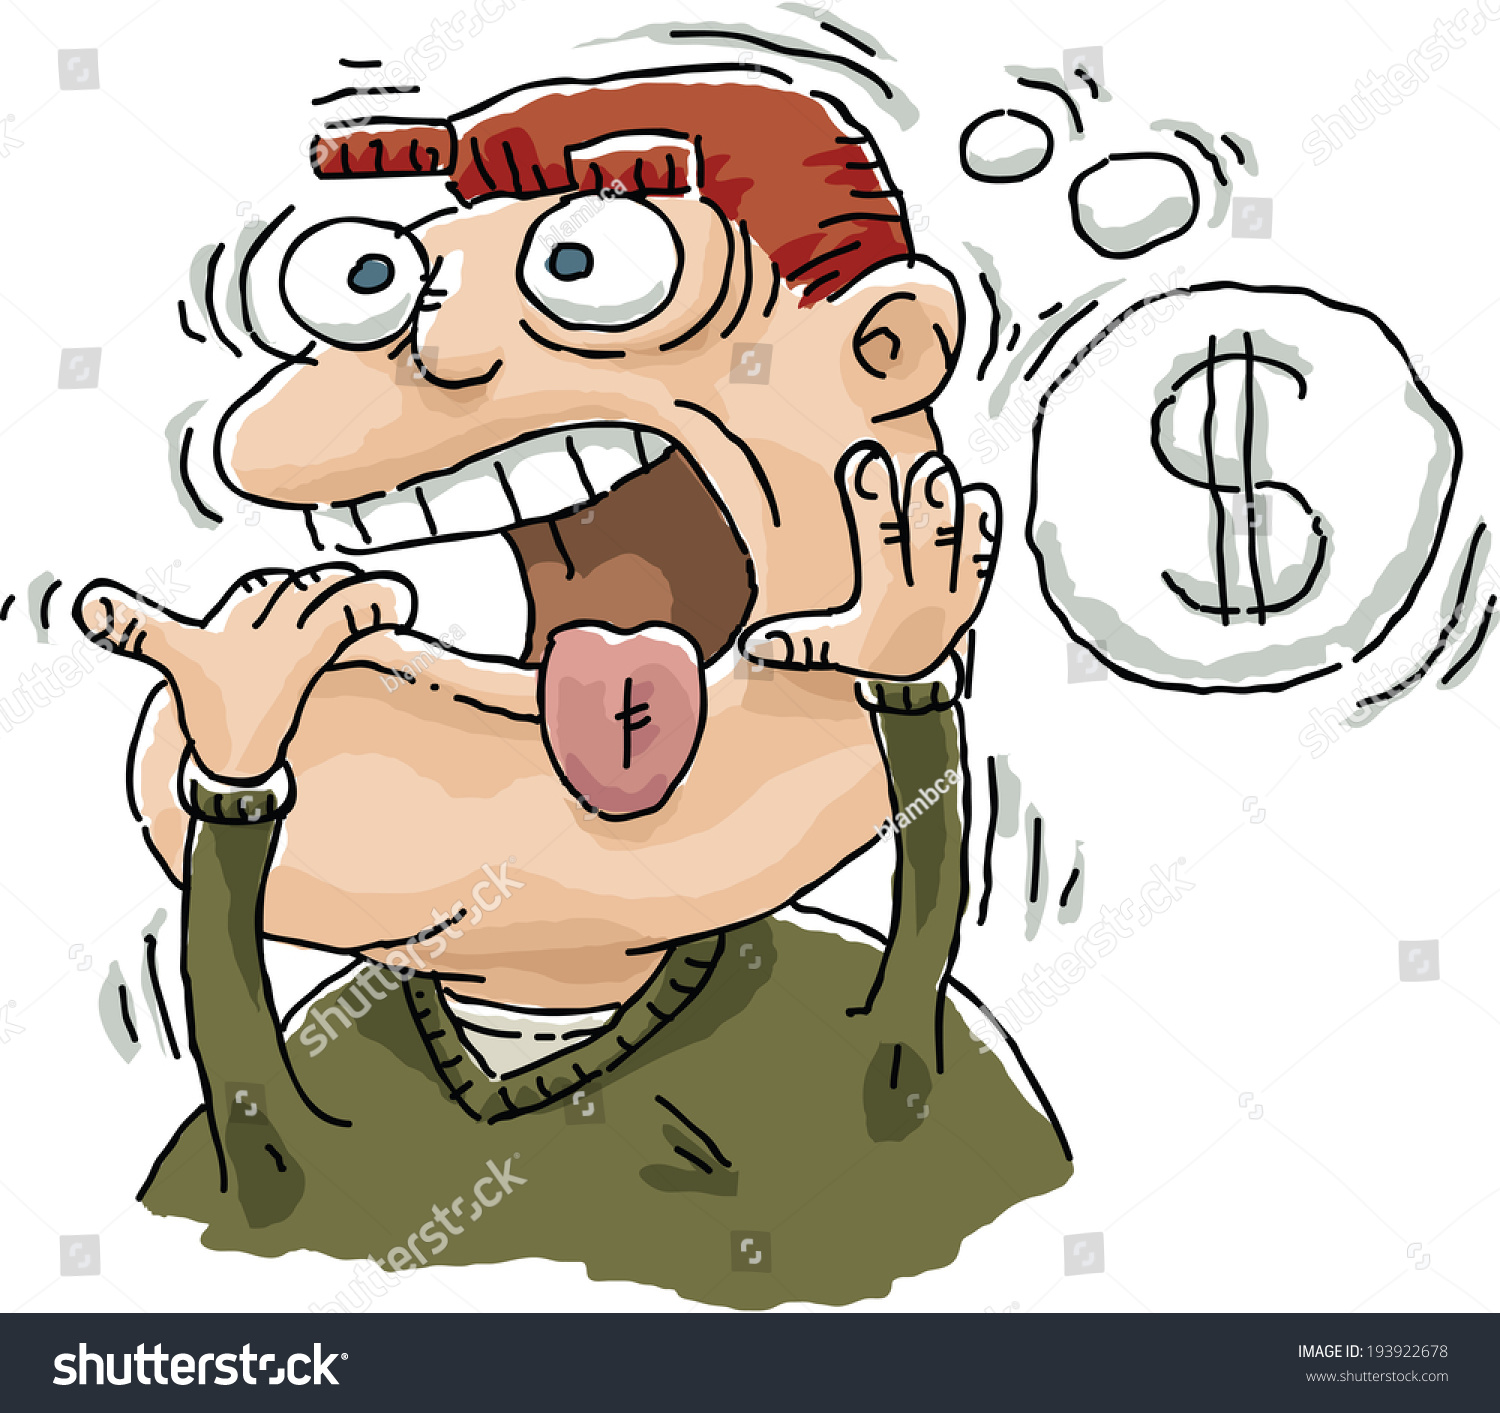 http://image.shutterstock.com/z/stock-vector-a-cartoon-man-shakes-with-fear-worrying-about-money-193922678.jpg